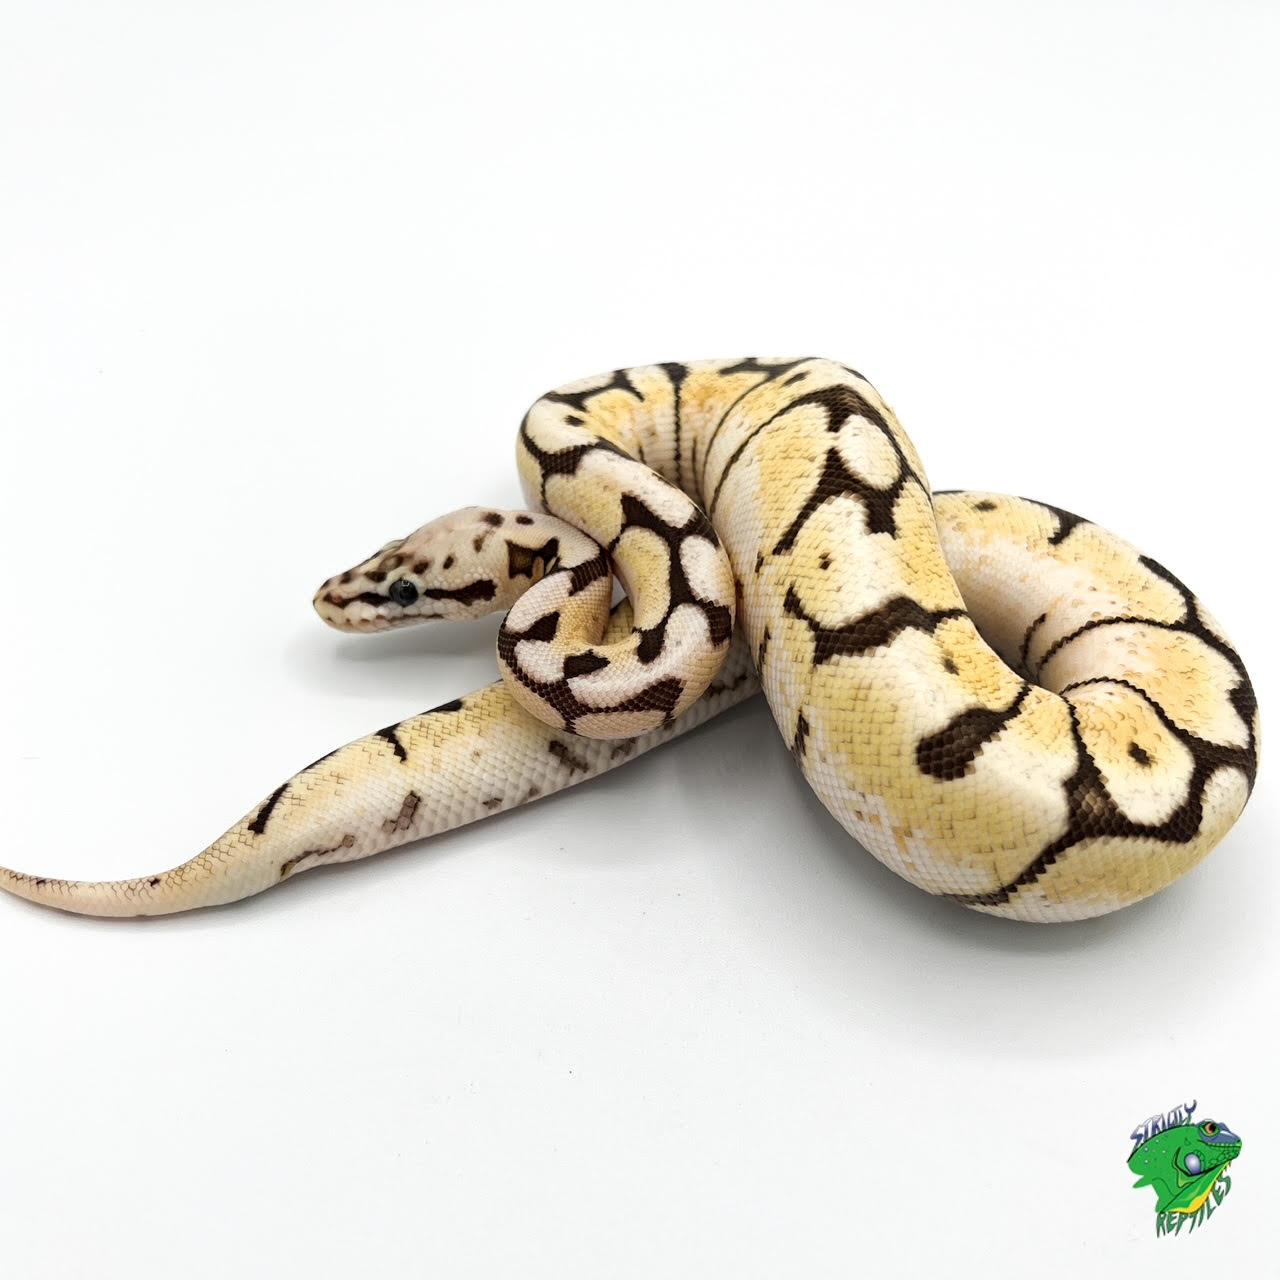 Fire Bumble Bee Ball Python - Big Baby - Strictly Reptiles Inc.